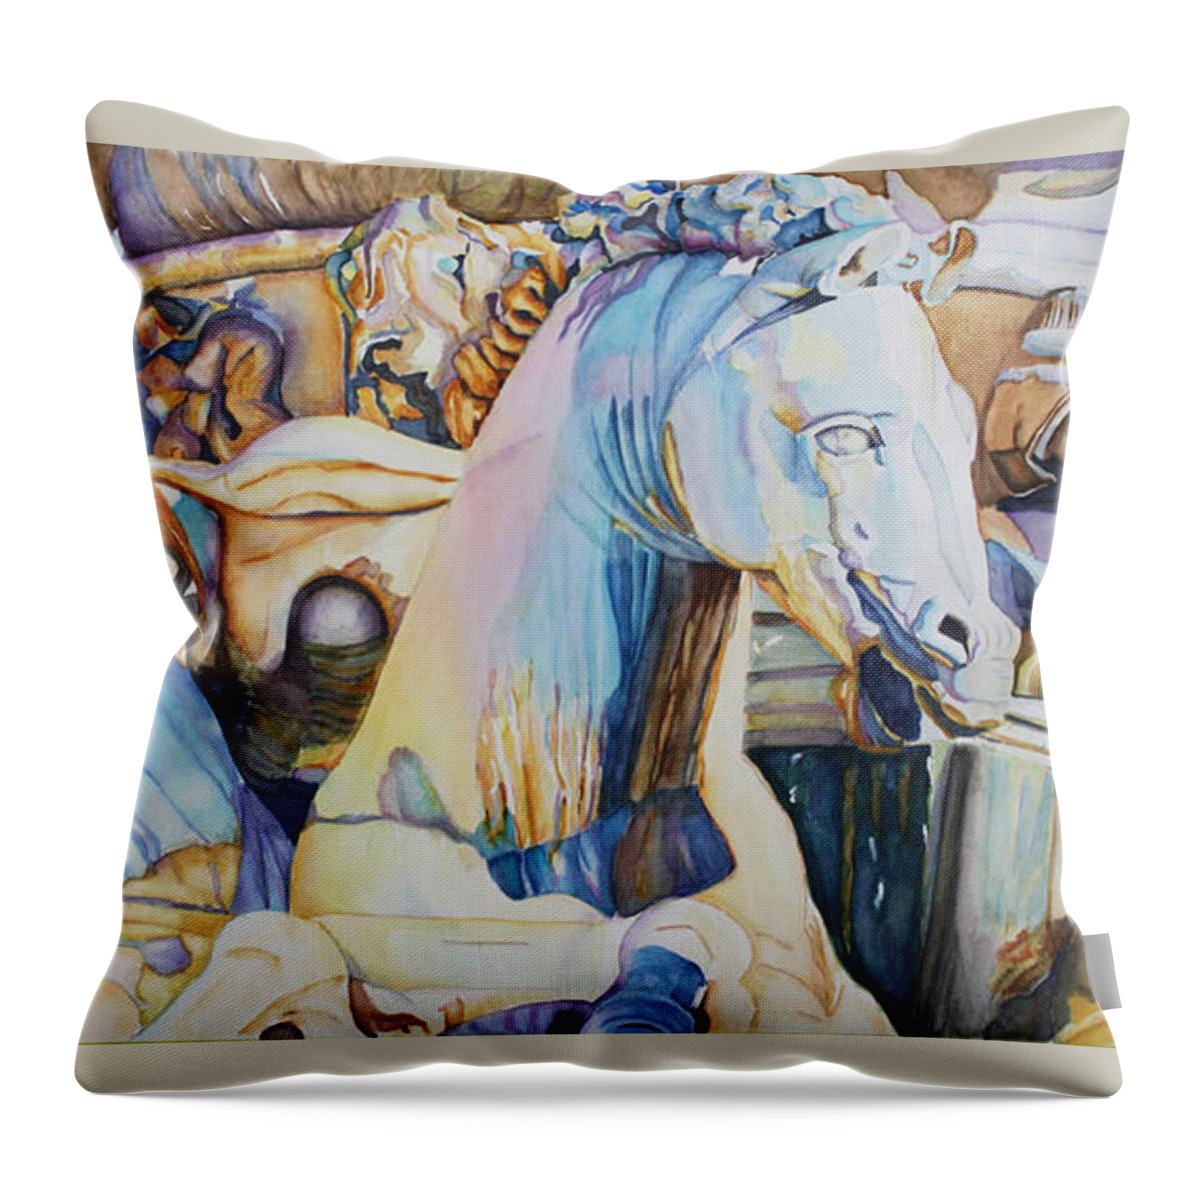 Watercolor Throw Pillow featuring the painting Neptune's Sea Horses - Florence by Christiane Kingsley